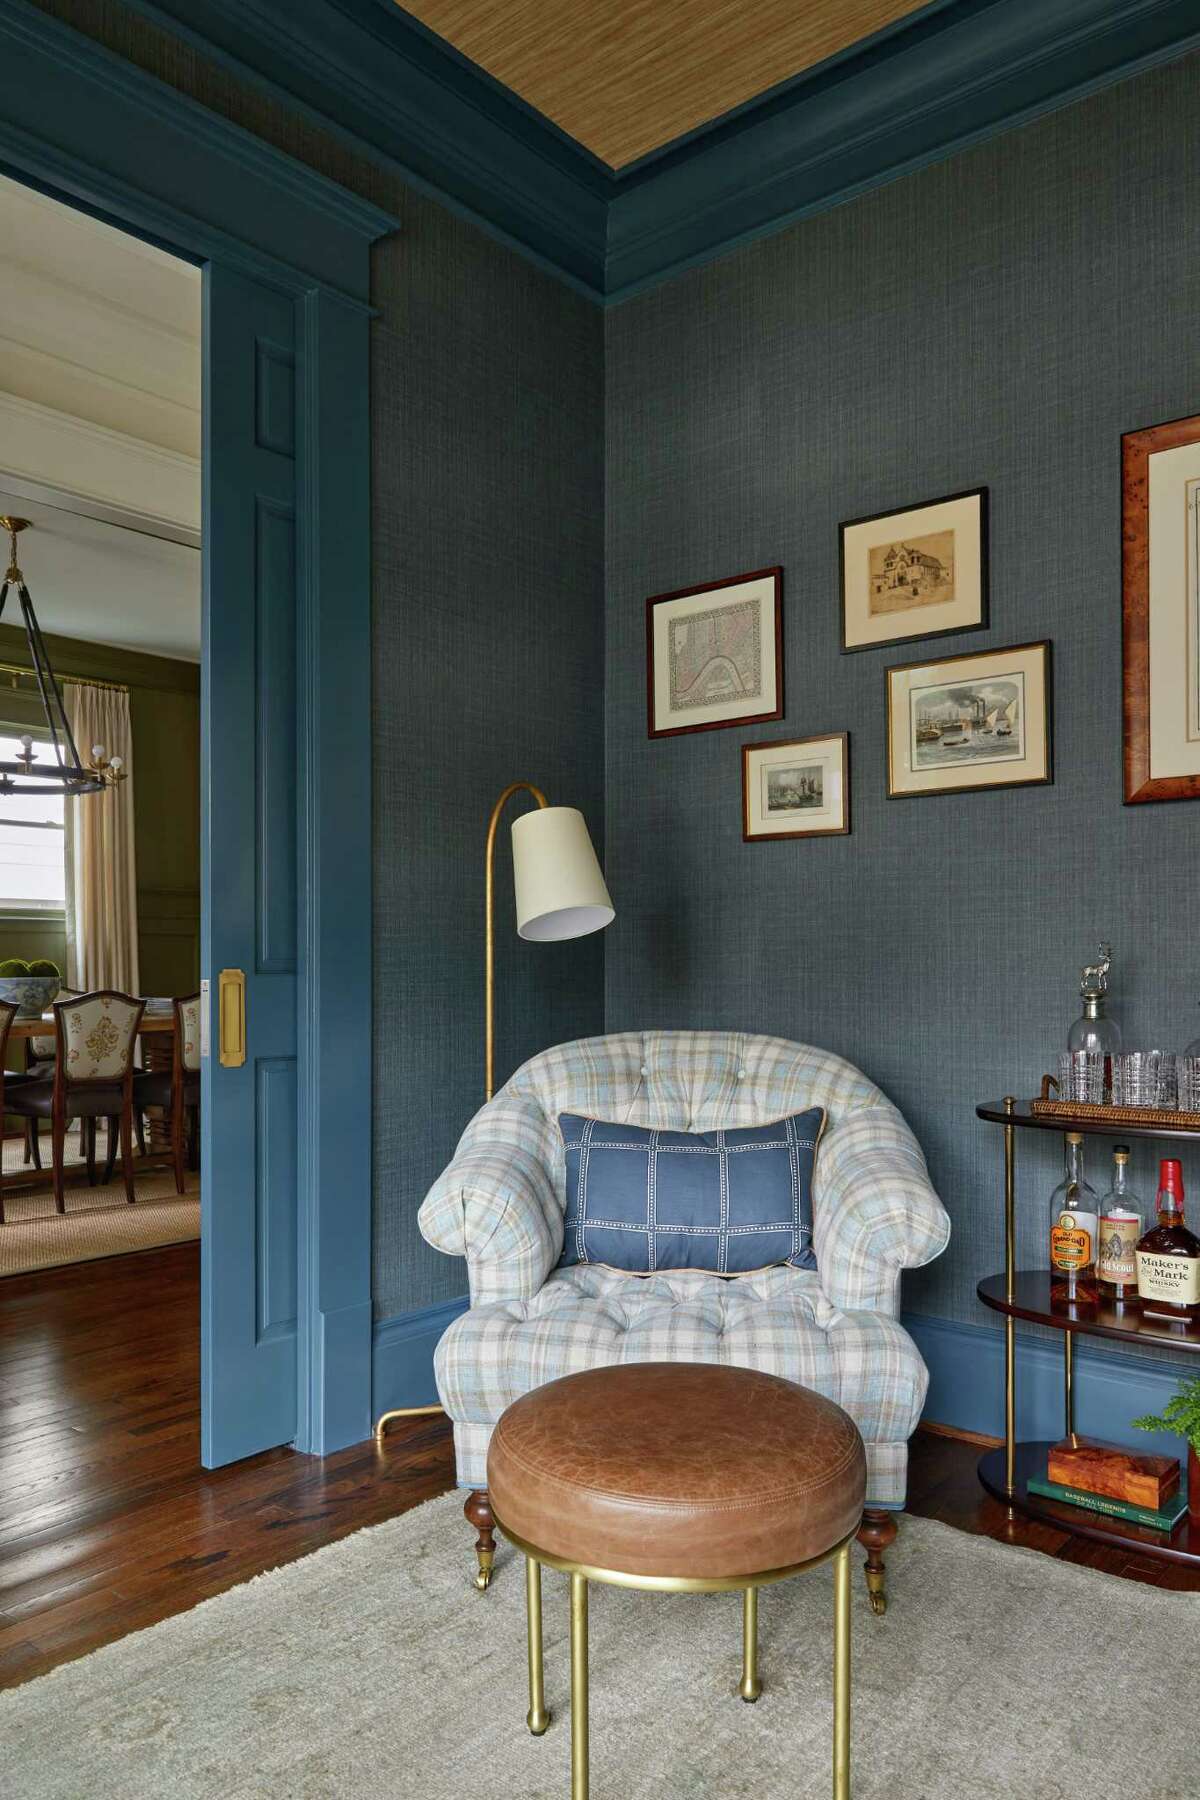 Vinyl grasscloth wallpaper and dark blue-green trim decorate the office/library.